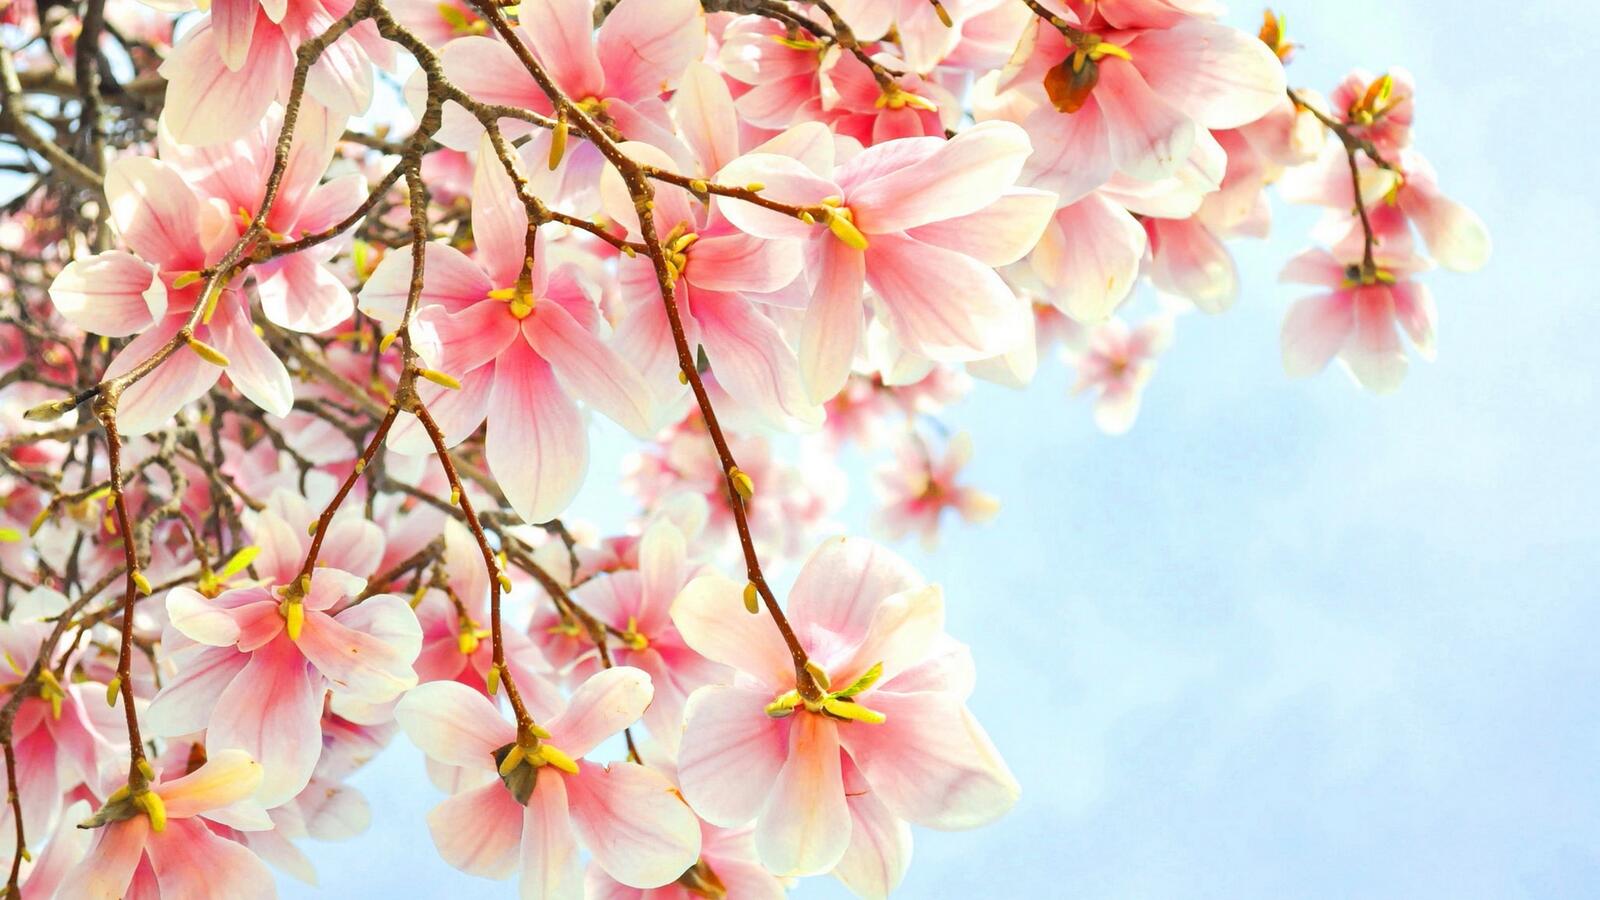 Wallpapers tree branches flowers on the desktop